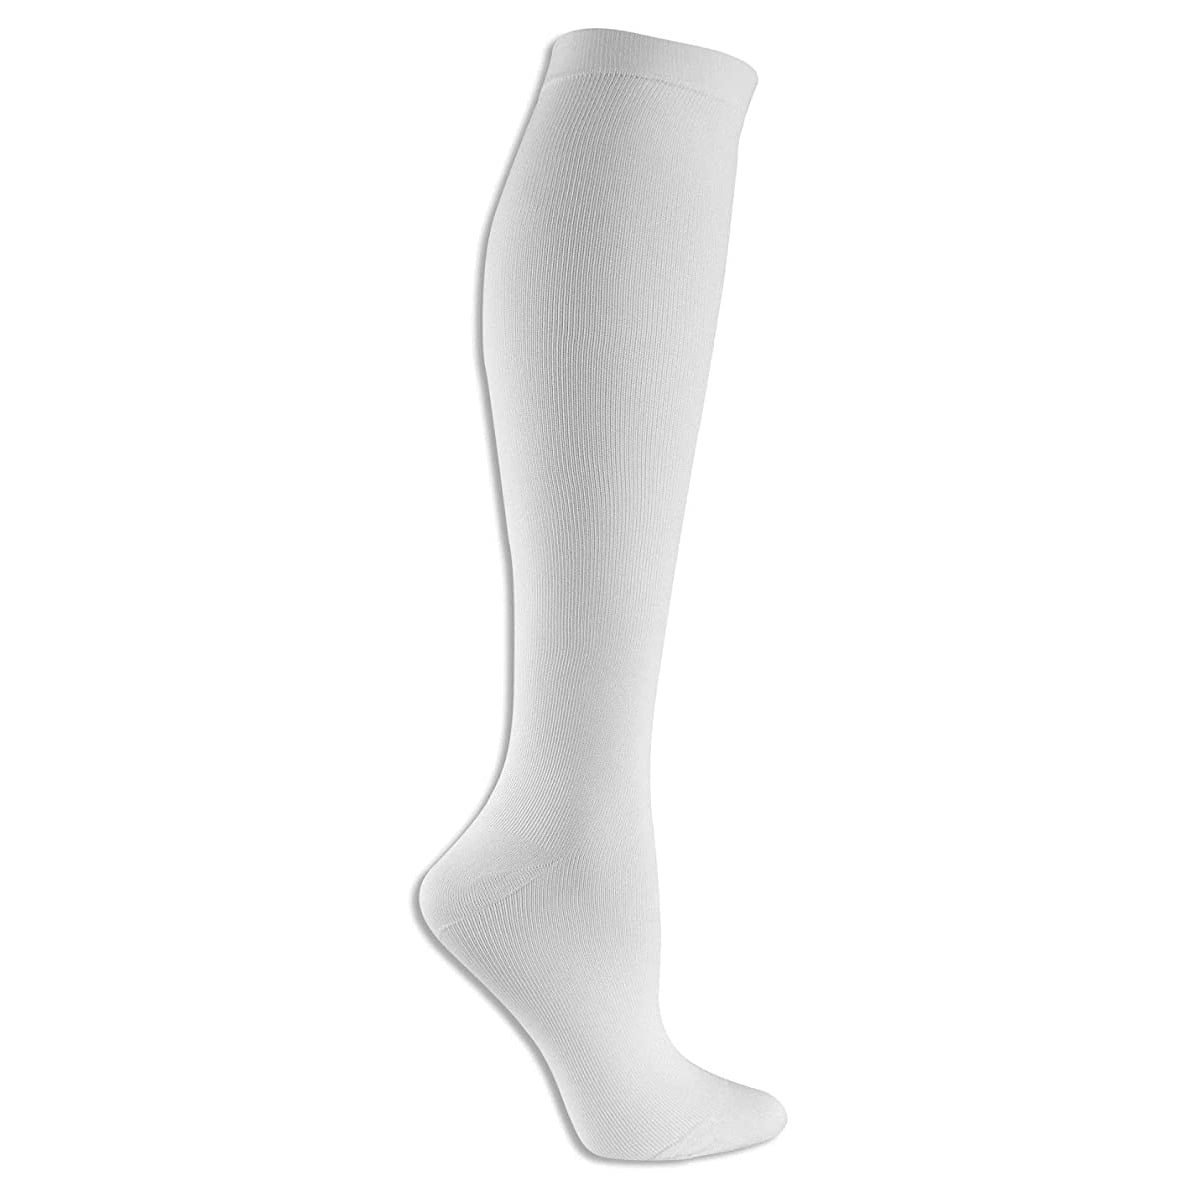 Dr. Scholl's Women's Graduated Mild Compression Relief Knee High Socks ...